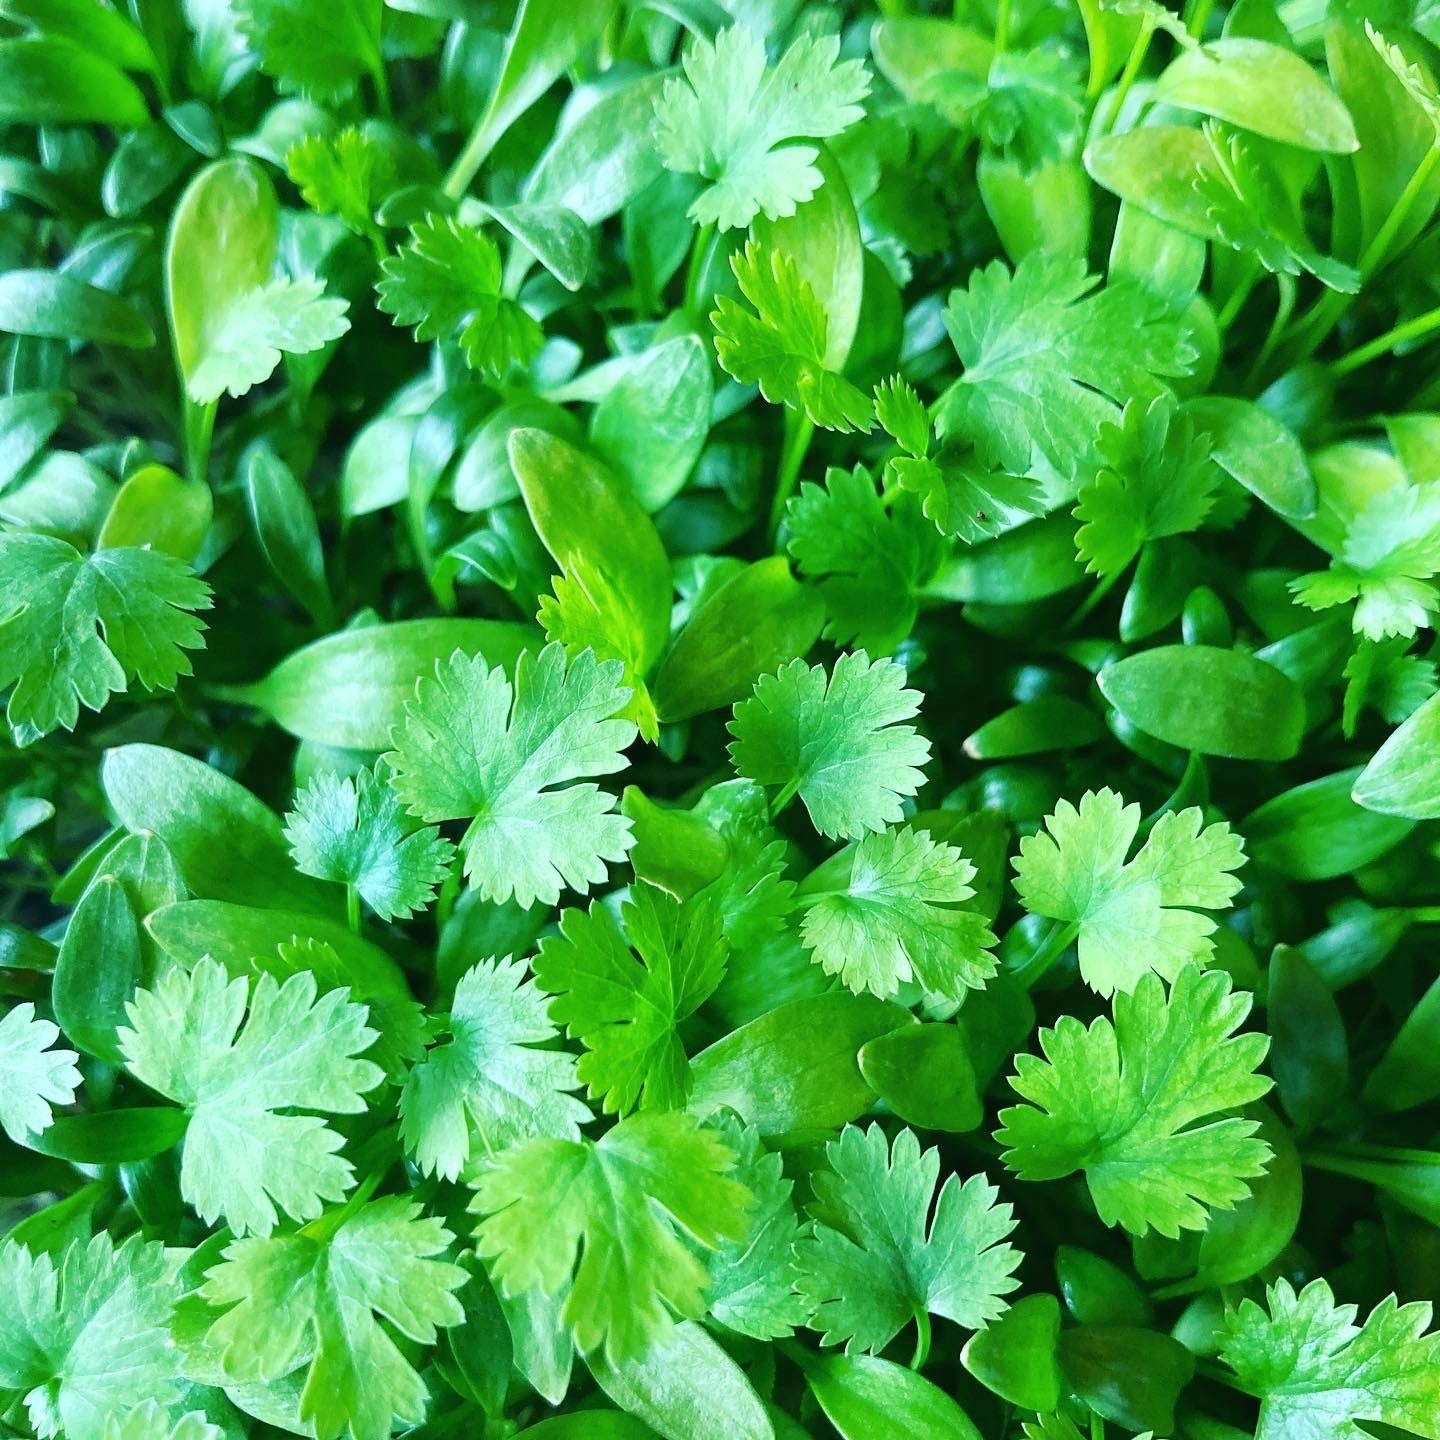 Enjoy the delicious taste of fresh cilantro all year! Cilantro microgreens are gorgeous on the plate as well as being high in vitamins C and K and antioxidants. Wonderful!